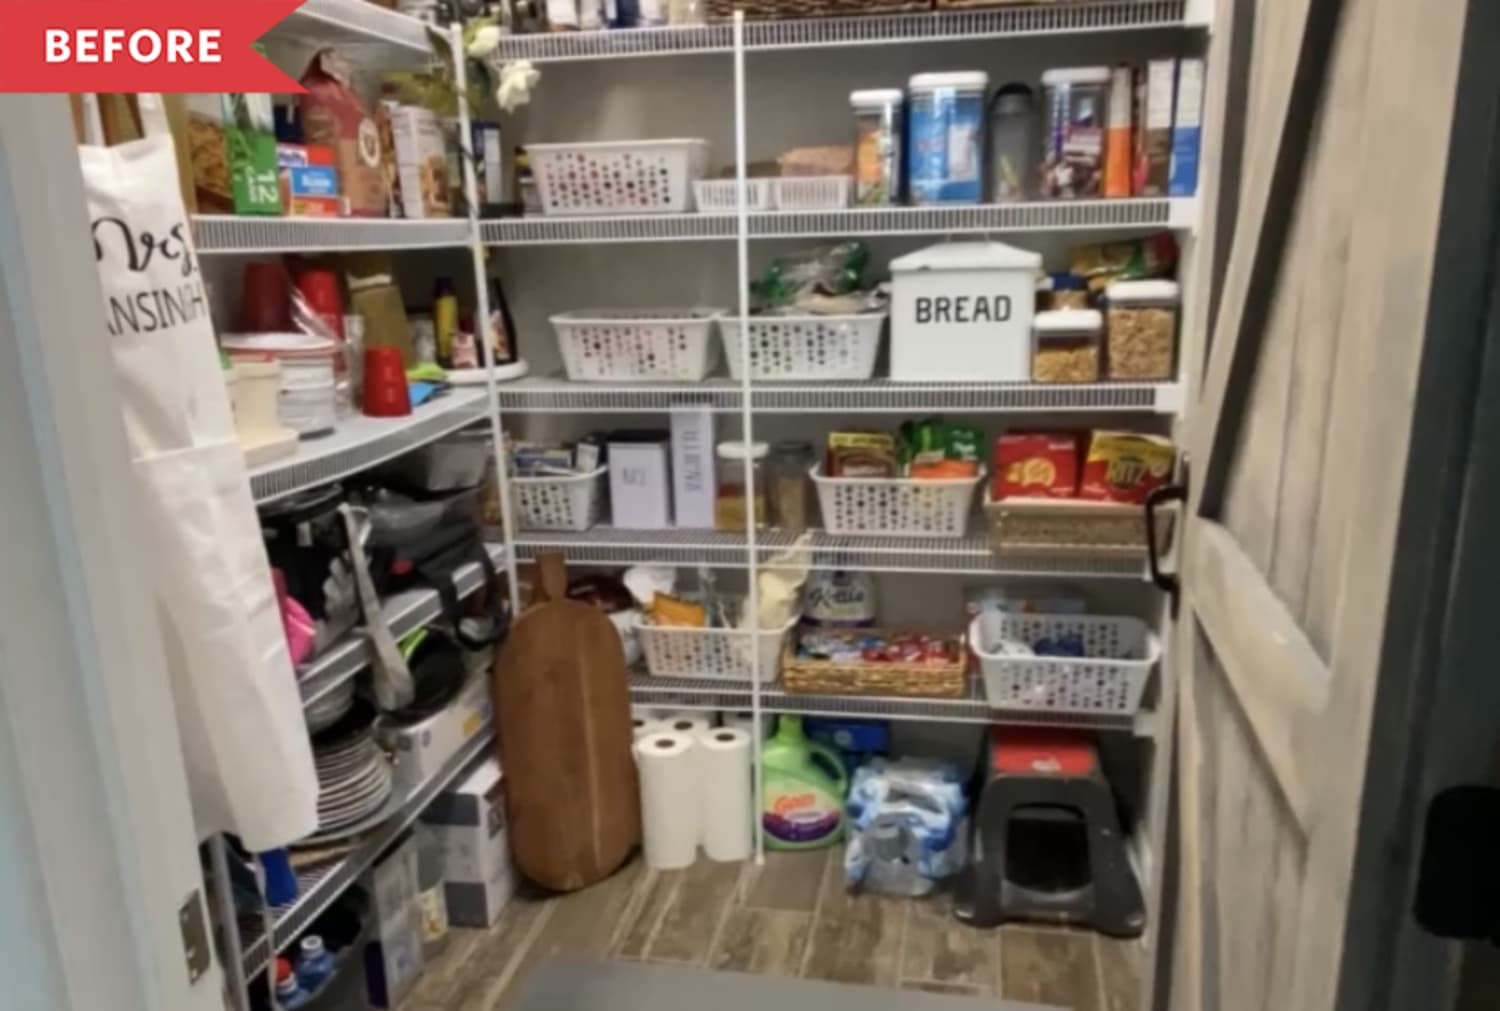 Before and After: Getting Rid of The Wire Shelves Made This Pantry Way More Functional